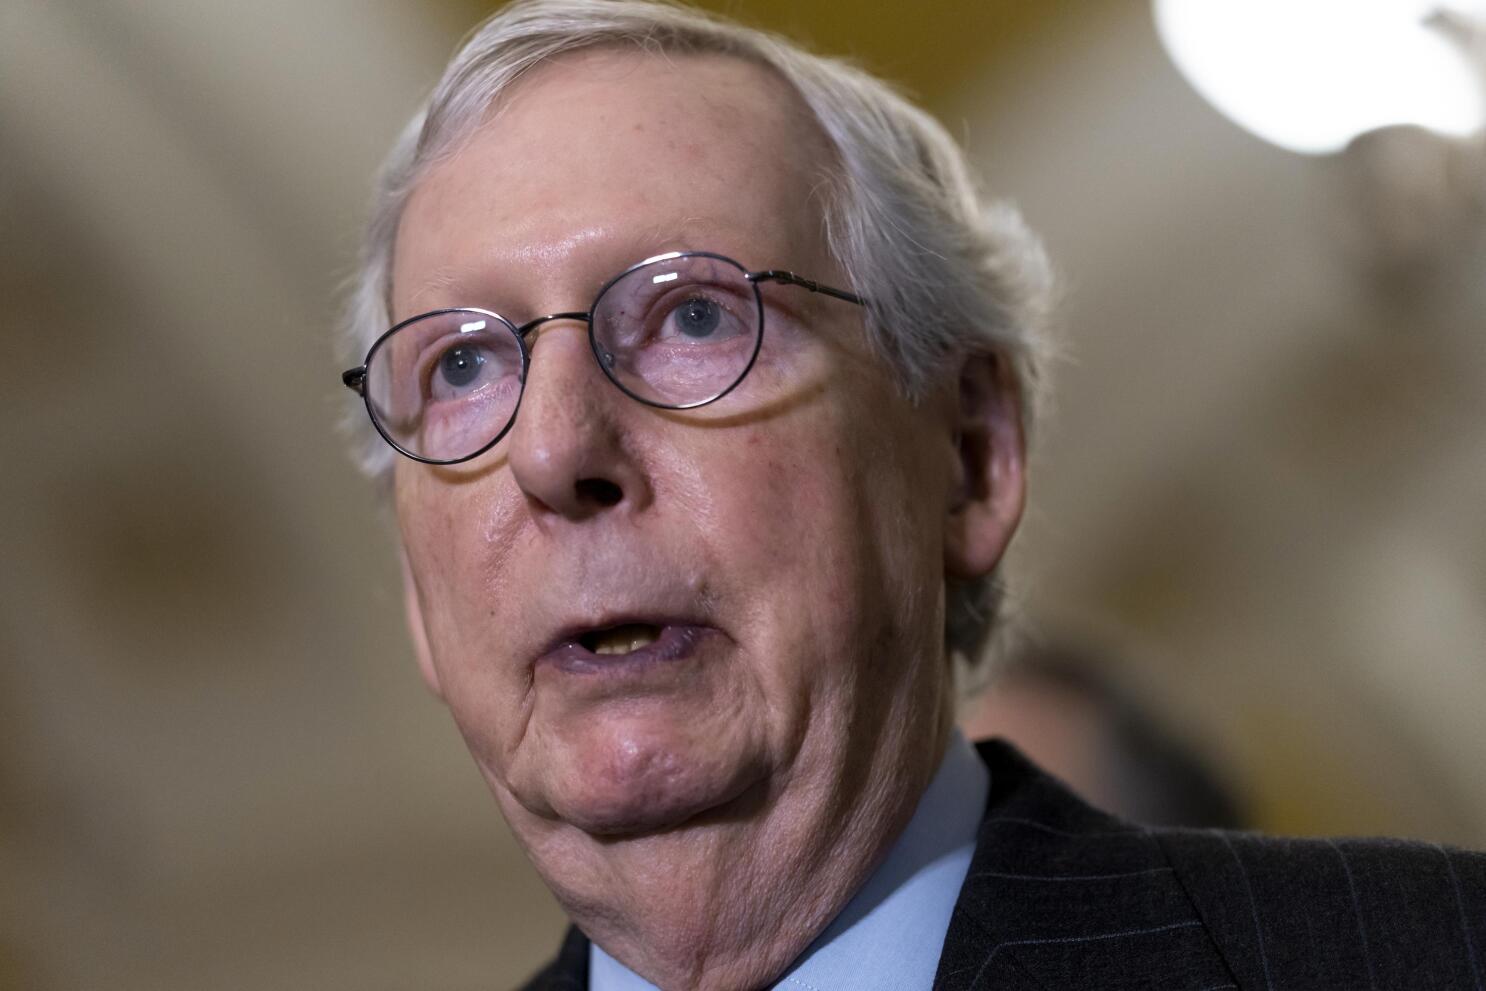 McConnell leaves rehab facility after therapy for concussion | AP News